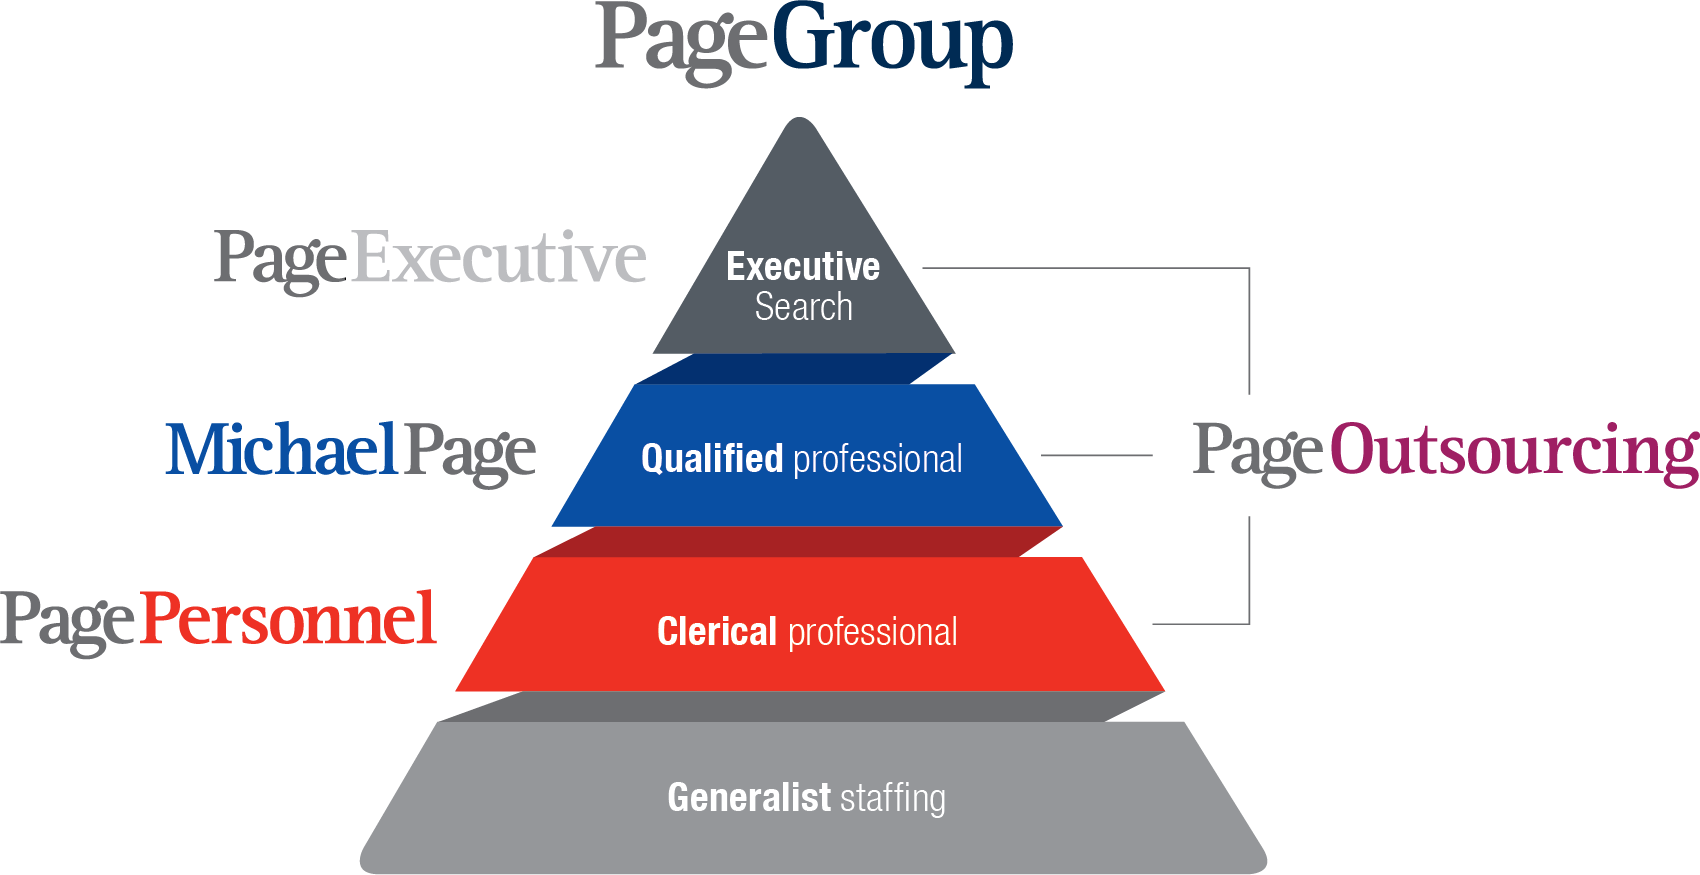 PageGroup Pyramid - All the brands under Page Group